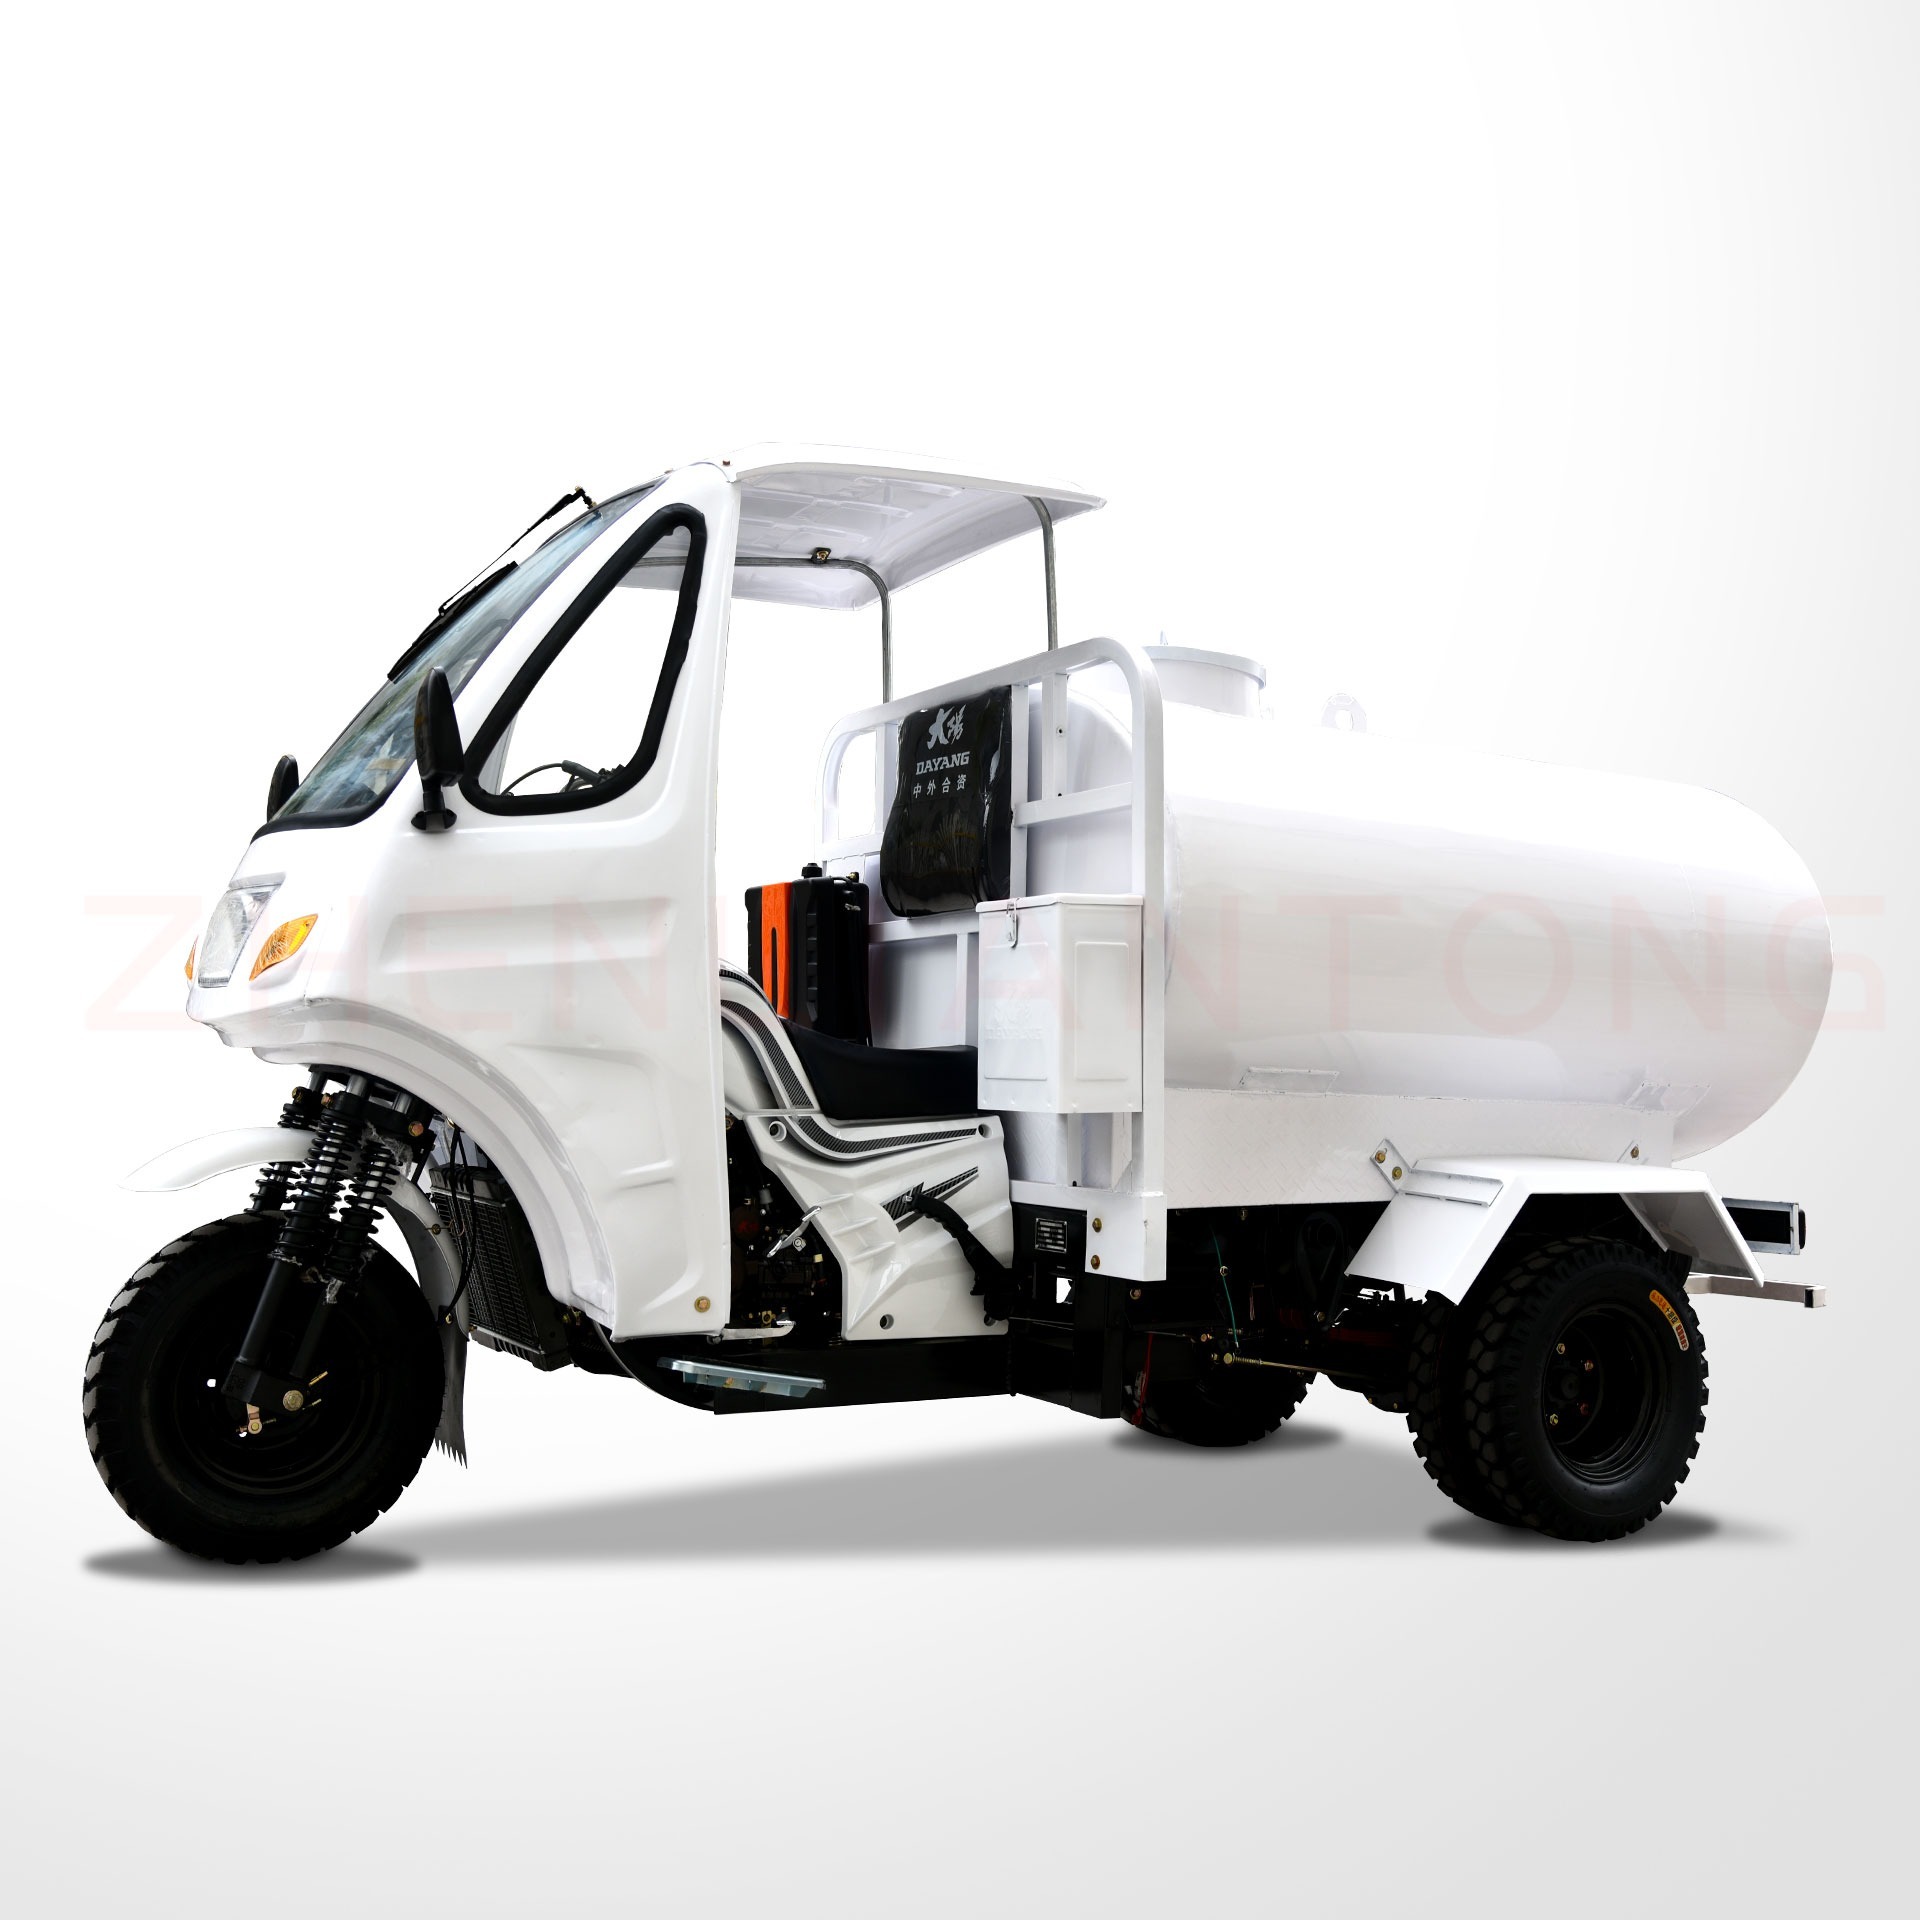 2021 Popular with White color Body Power Wheels Origin Type Water Tank Tricycle CCC Origin Type for Adult made in China